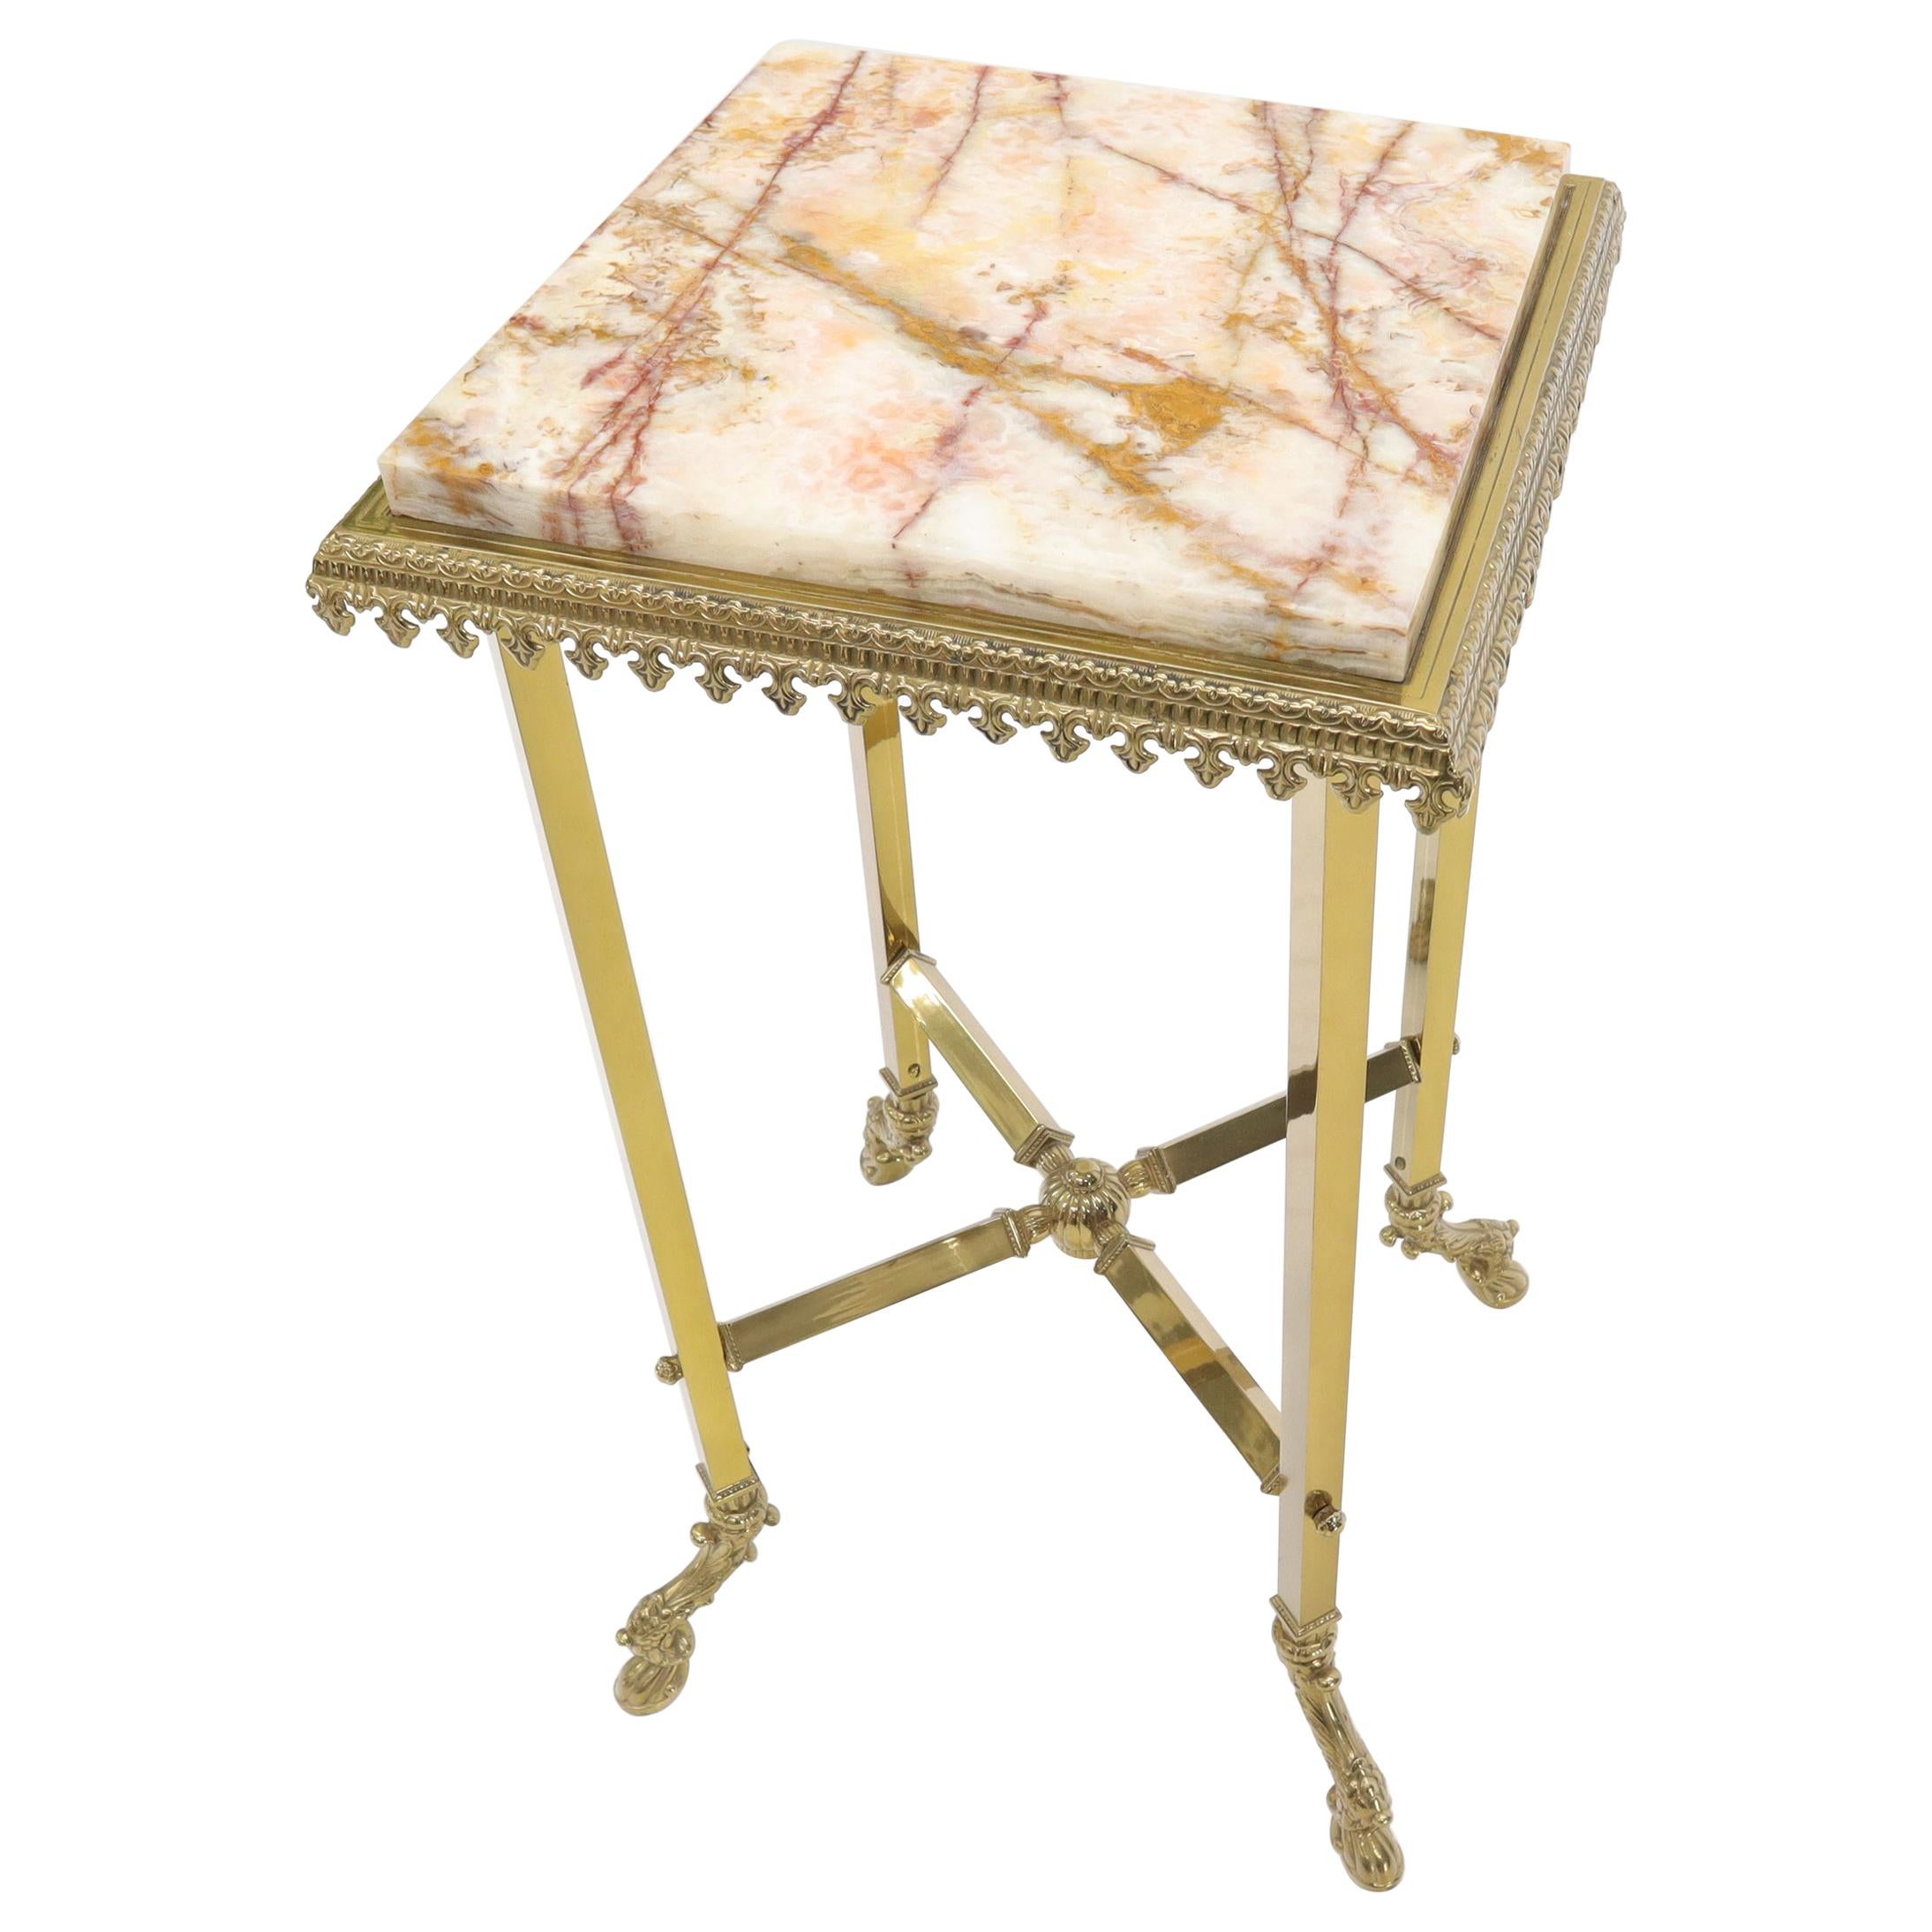 Square Solid Brass Onyx Marble Top Stand Pedestal Hoof Feet X-Stretcher Finial For Sale